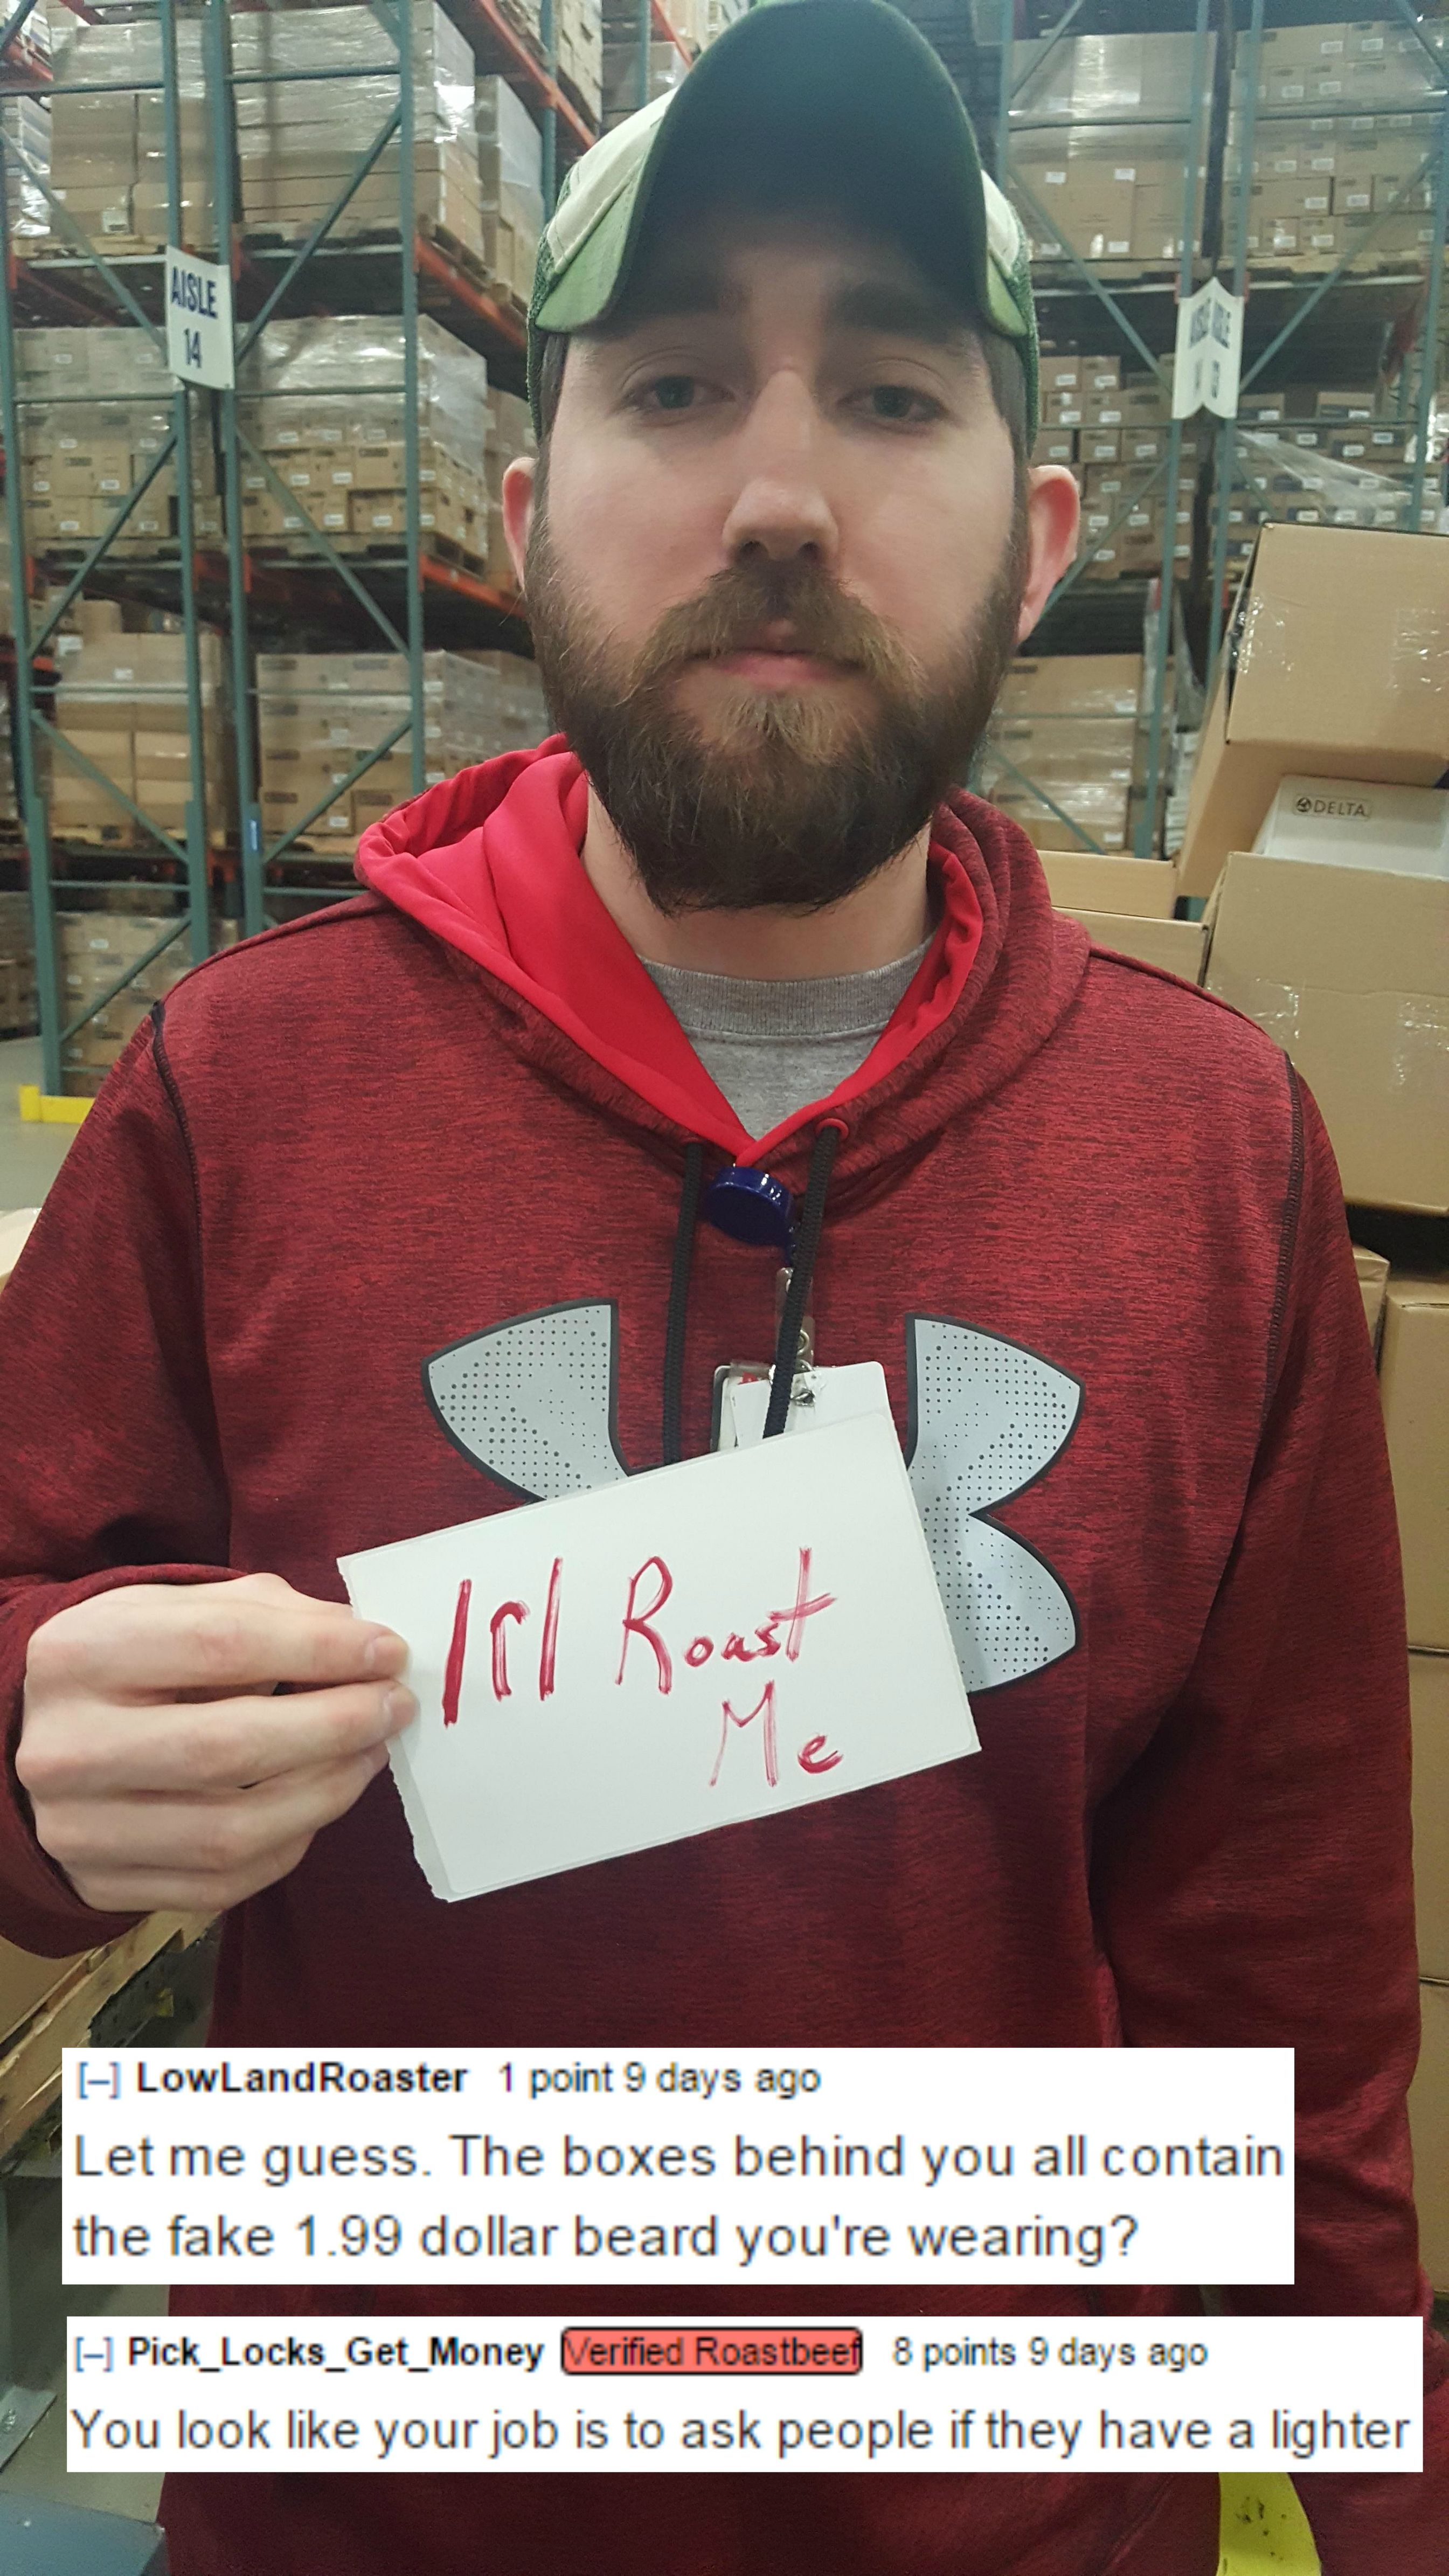 funny internet roast - I LowLand Roaster point 9 days ago Let me guess. The boxes behind you all contain the fake 1.99 dollar beard you're wearing? Pick_Locks_Get_Money tried Roastee points 8 days ago You look your job is to ask people if they have a ligh